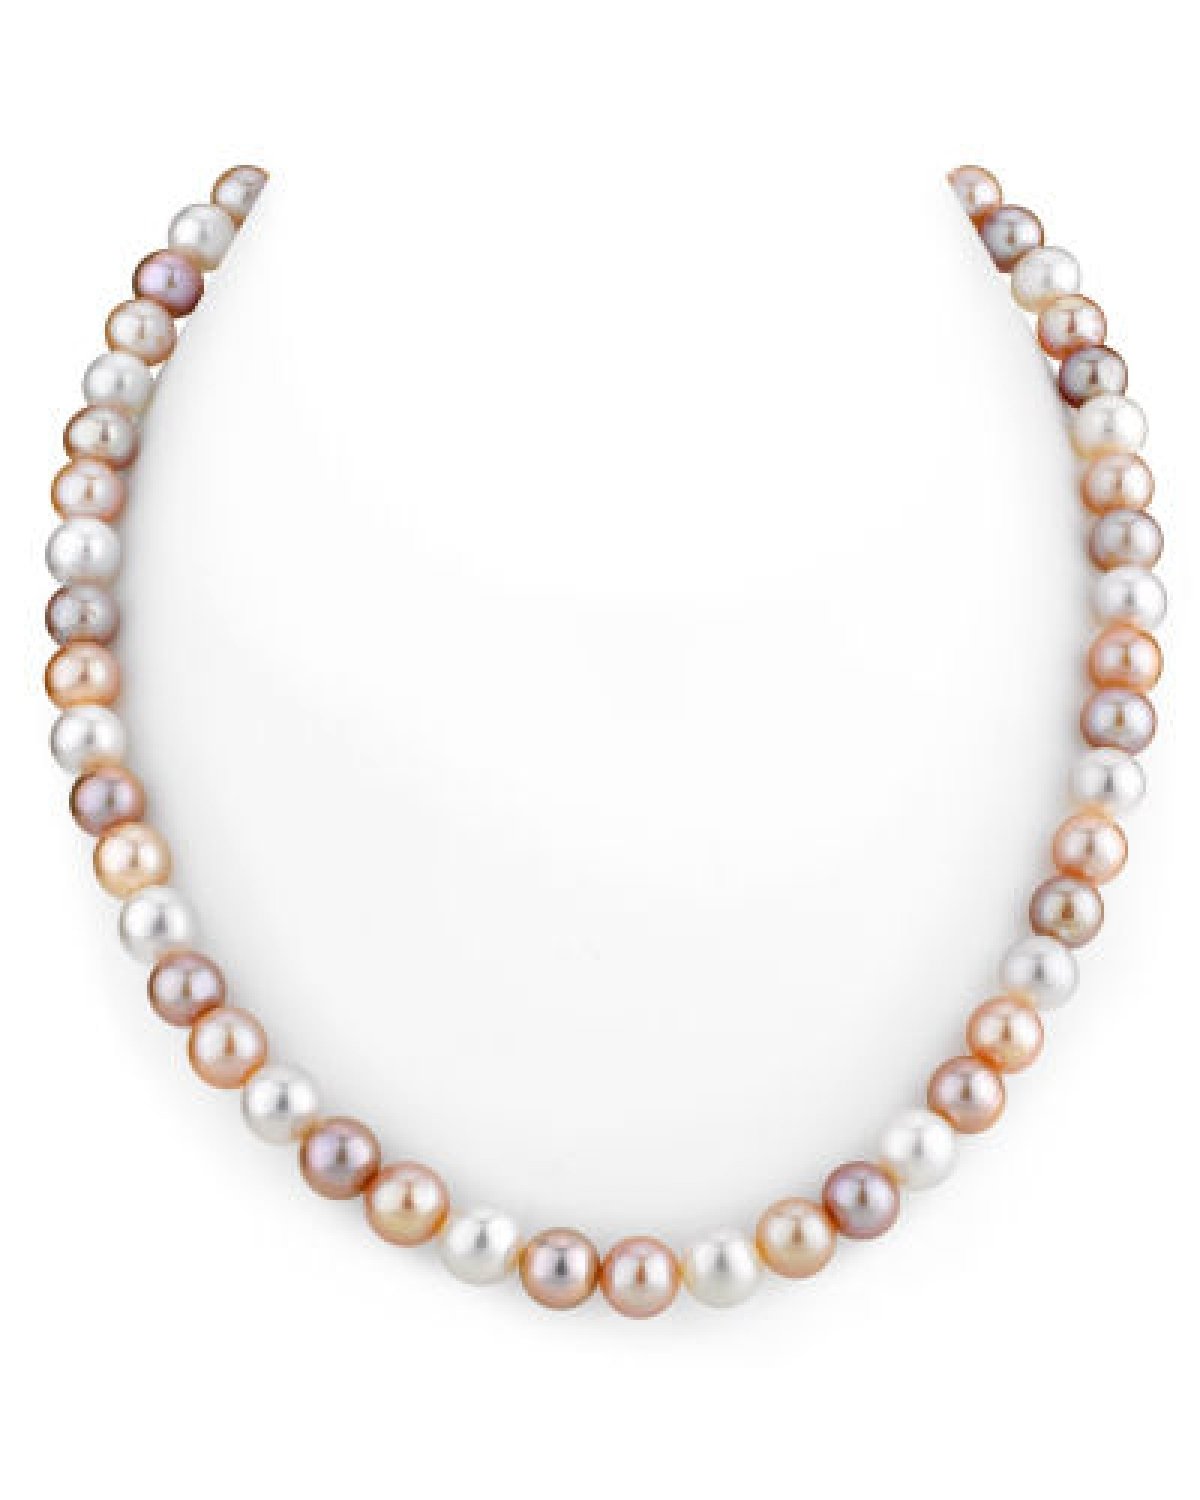 Triple Strand Beaded Cultured Pearl Necklace with 14k Yellow Gold, Sapphire  & Turquoise Clasp - Sindur Style